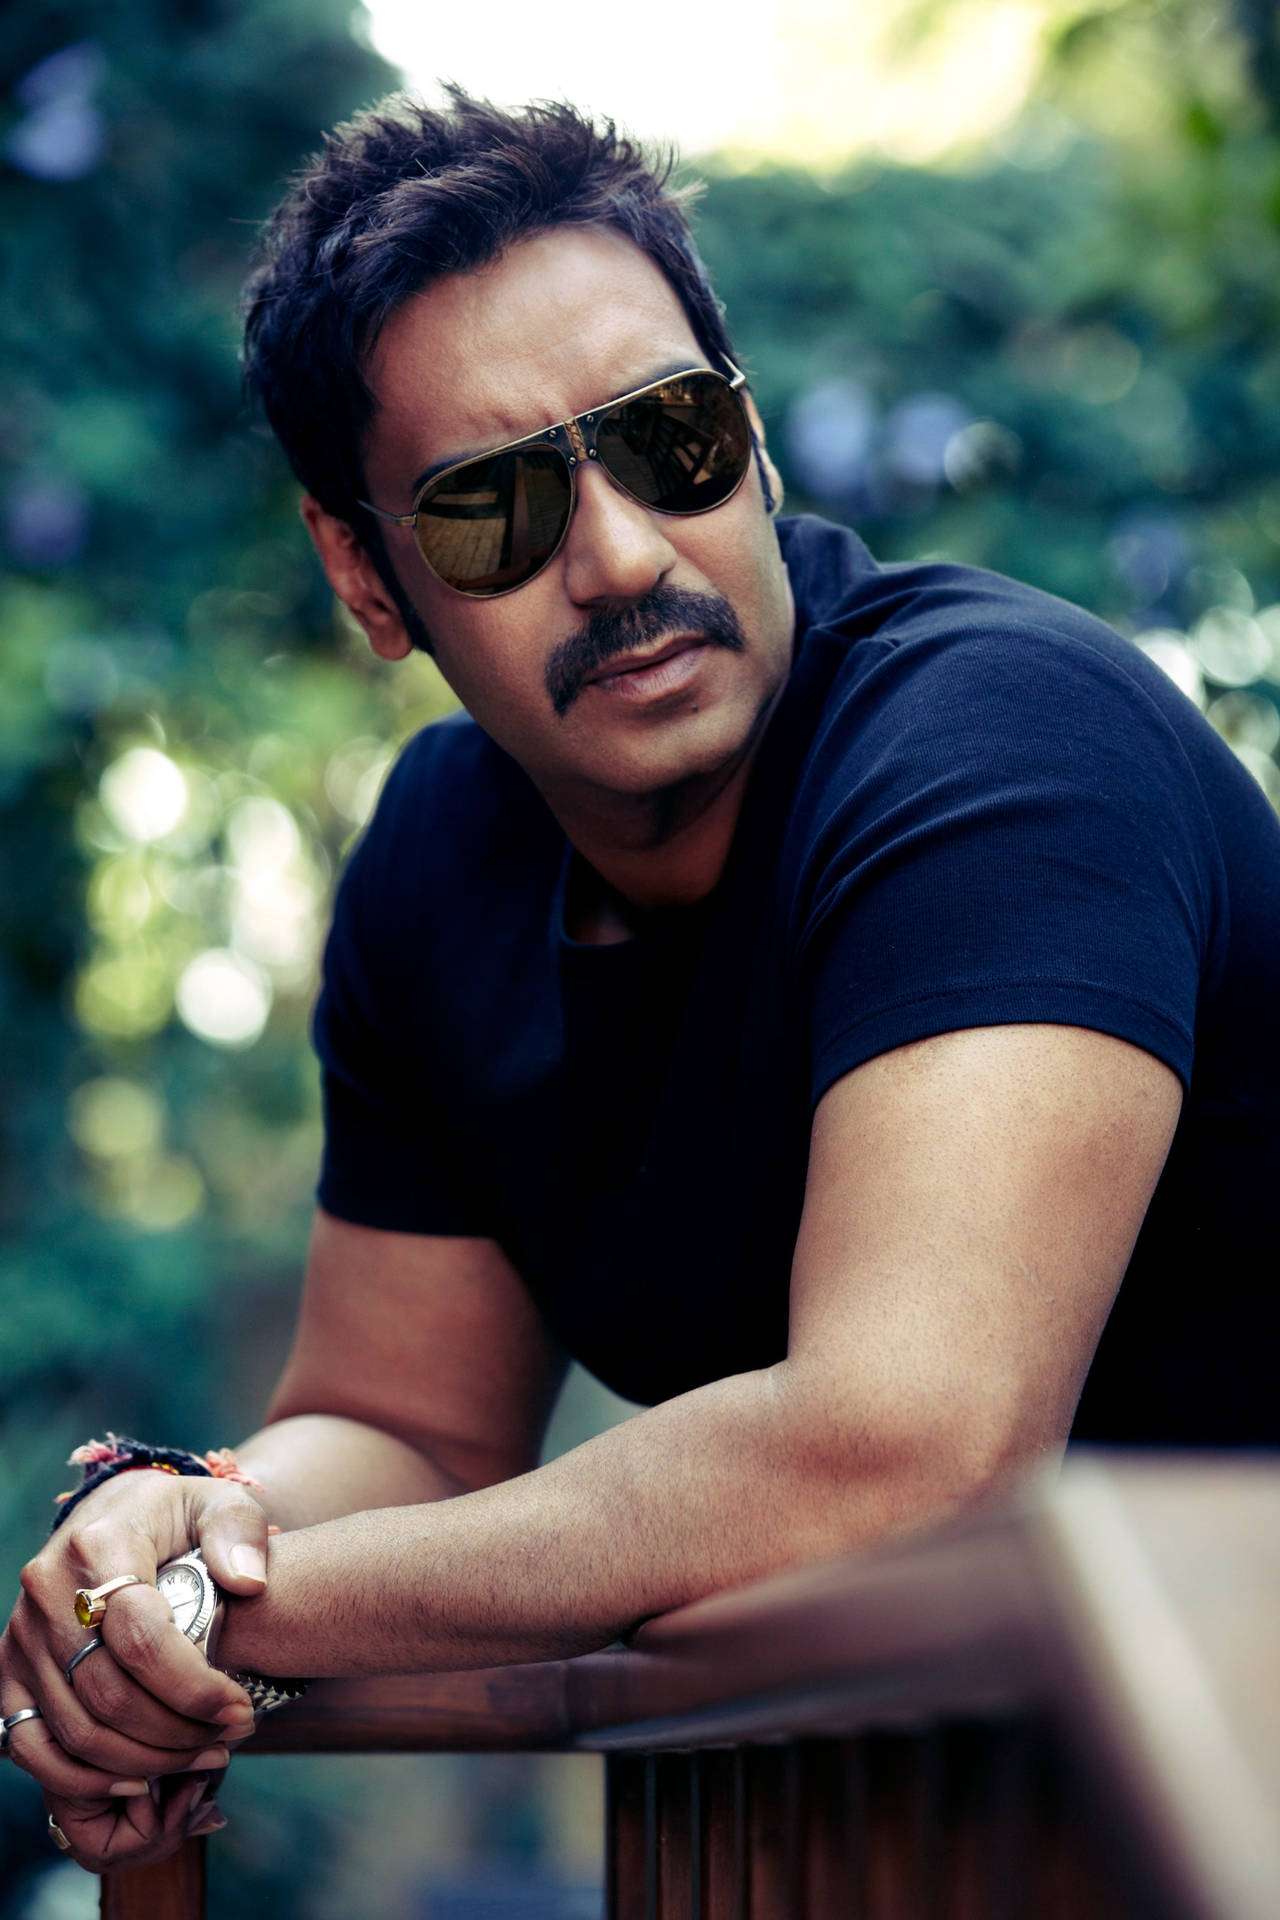 Ajaydevgn Globales Filmmotiv (for A German Computer Or Mobile Wallpaper Theme Featuring Ajay Devgn's Global Movie Cover) Wallpaper